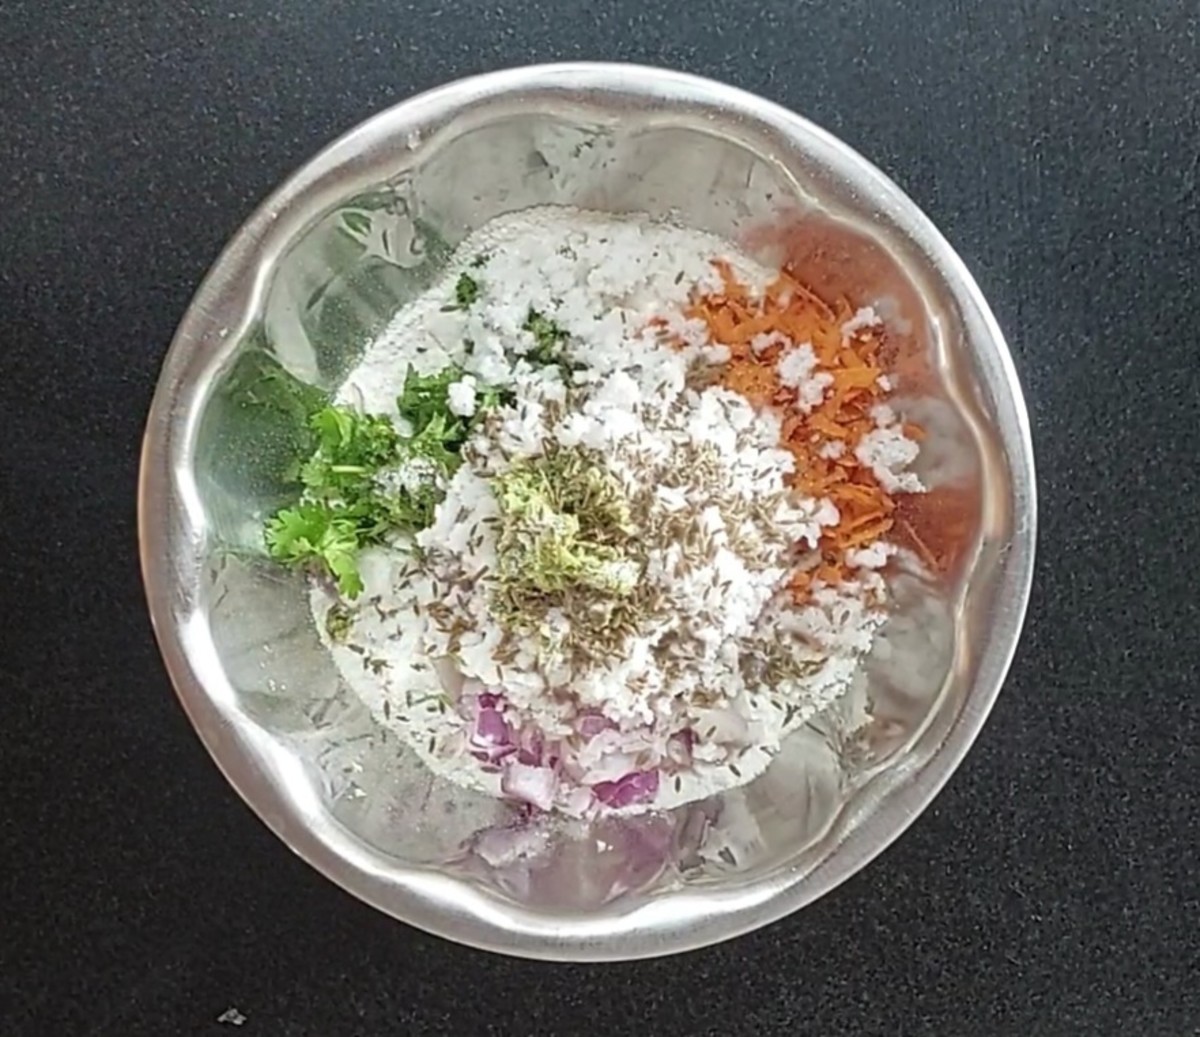 add 1 finely chopped onion, 1 grated carrot, 1/4 cup chopped coriander leaves, 3/4 cup fresh grated coconut, 1 teaspoon ginger-green chili paste, 1 teaspoon cumin seeds, salt.